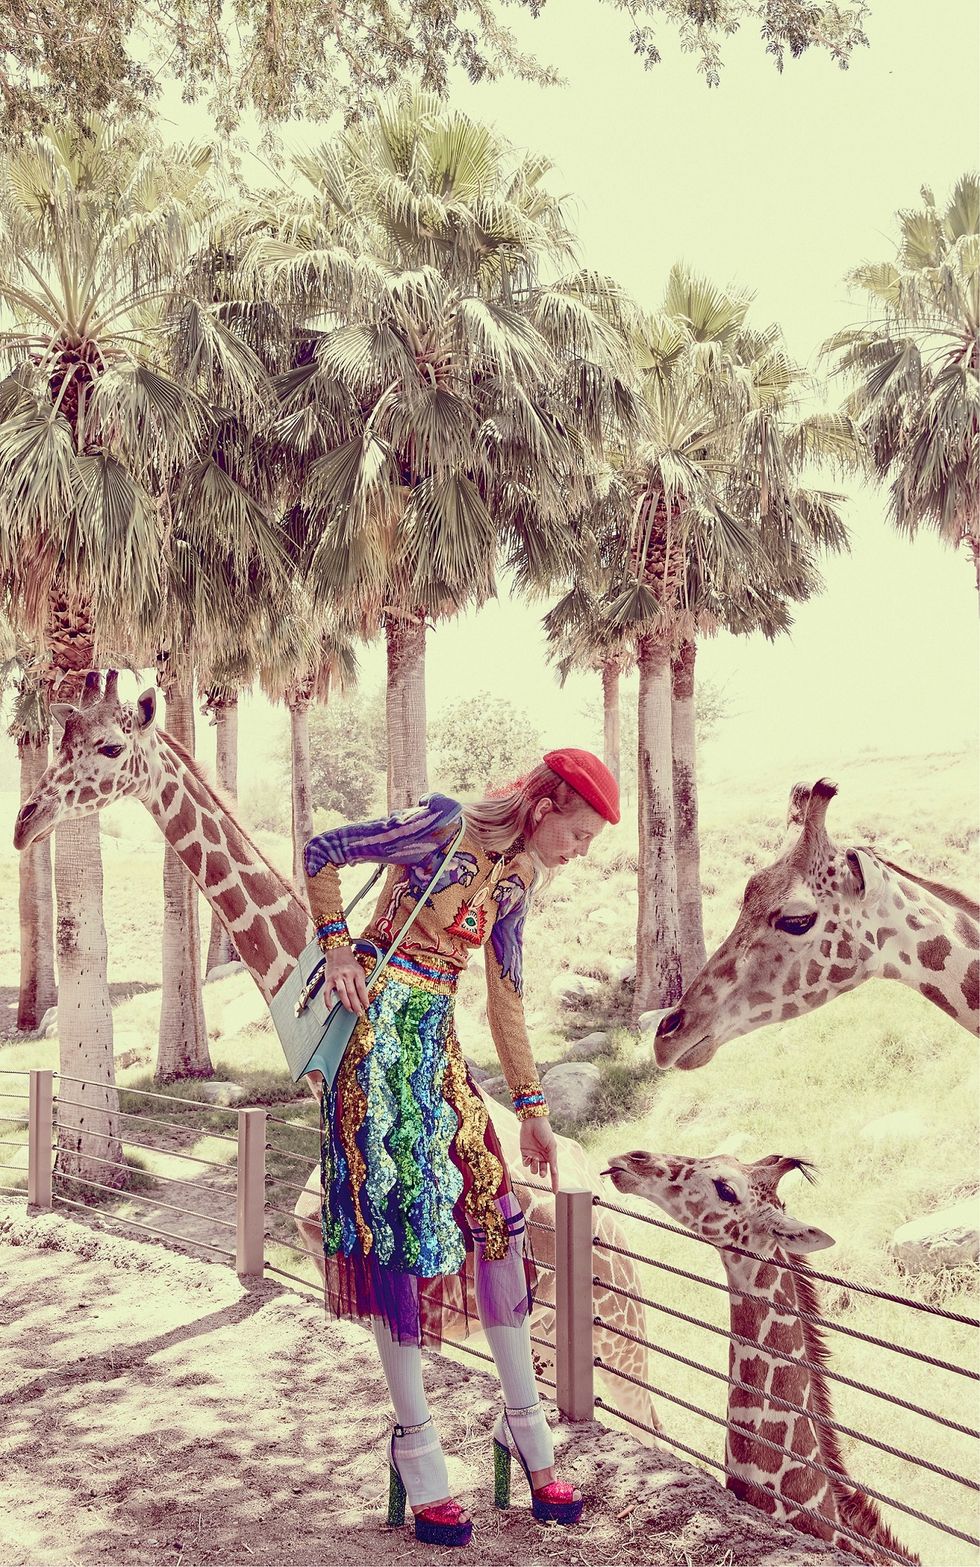 People in nature, Dress, Arecales, Woody plant, Street fashion, Magenta, Waist, Trunk, Palm tree, Tropics, 